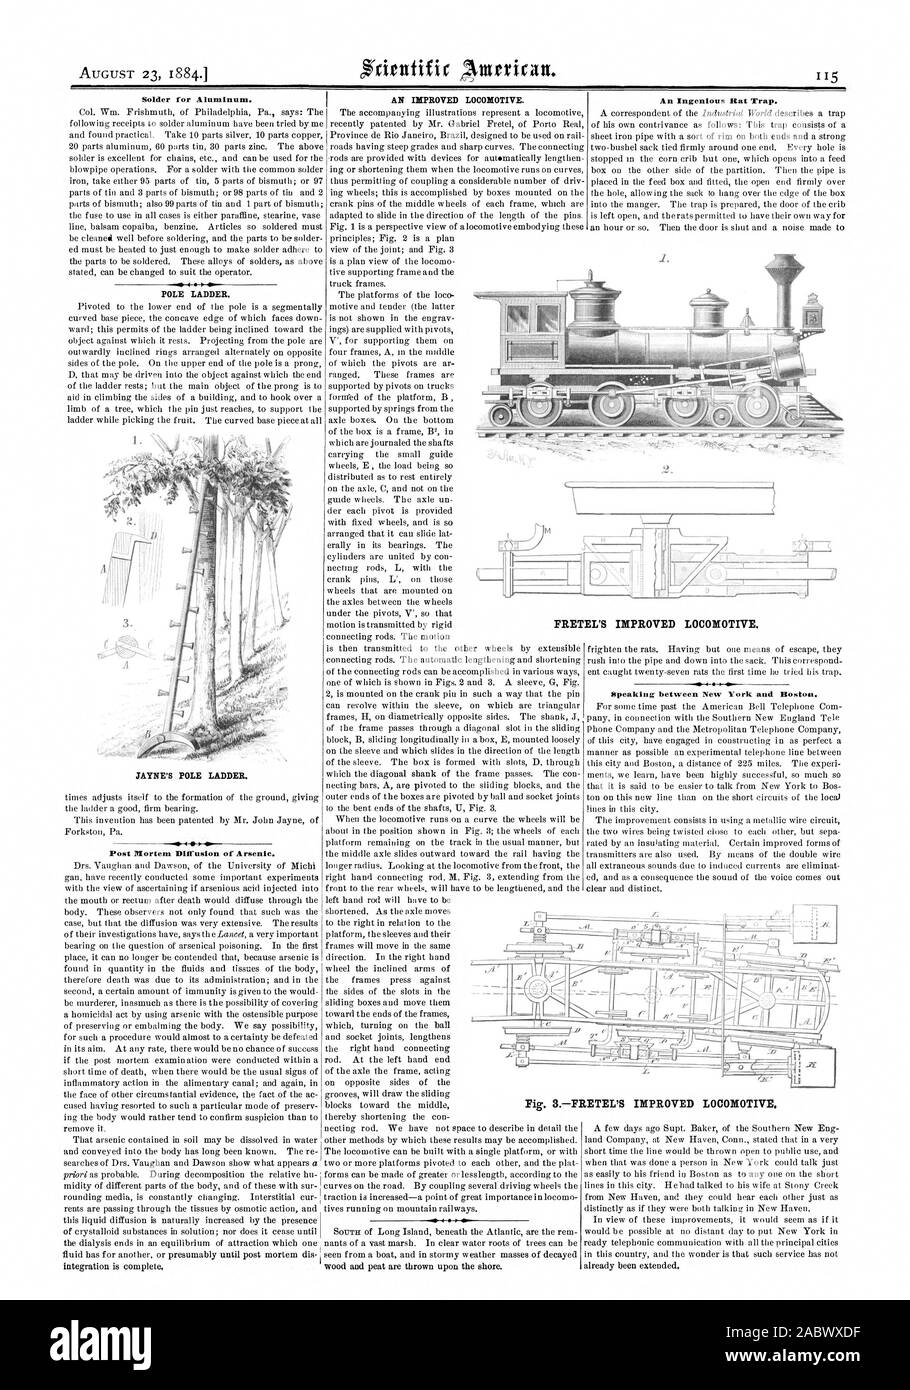 AUGUST 23 18841 Solder for Aluminum. POLE LADDER. JAYNE'S POLE LADDER. Post Mortem Diffusion of Arsenic. An Ingenious Rat Trap. Speaking between New York and Boston. AN IMPROVED LOCOMOTIVE. FRETEL'S IMPROVED LOCOMOTIVE., scientific american, 1884-08-23 Stock Photo